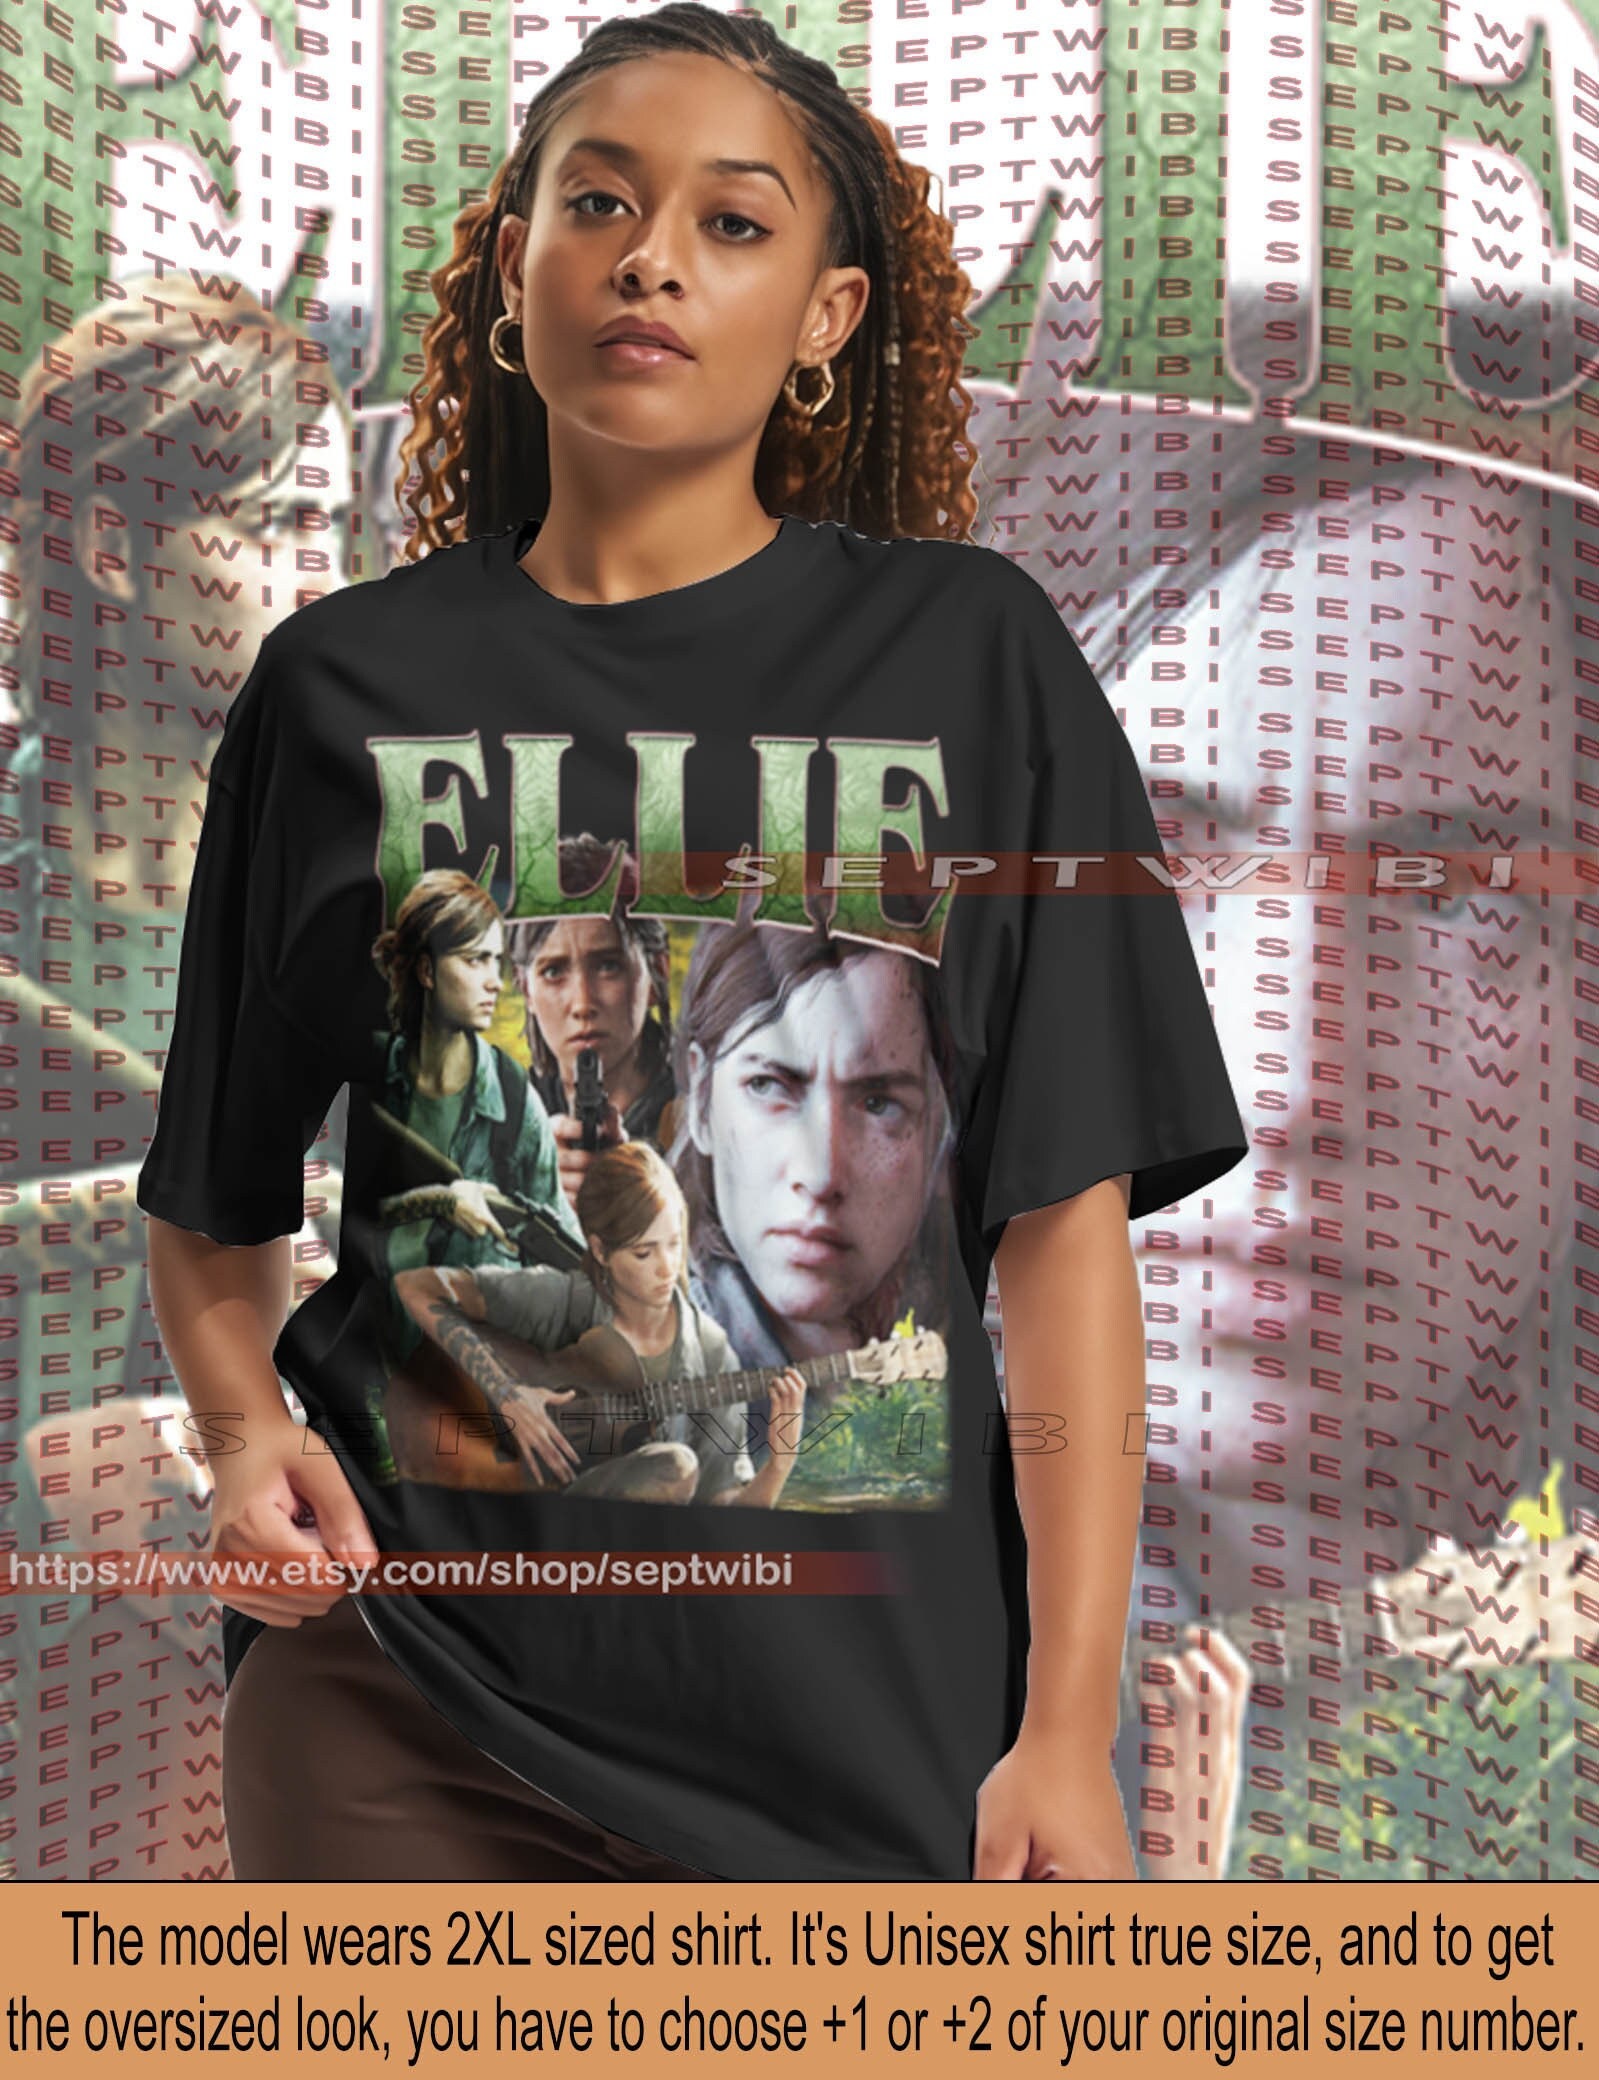 ellie and joel the last of us 2 wallpaper signatures shirt - Limotees